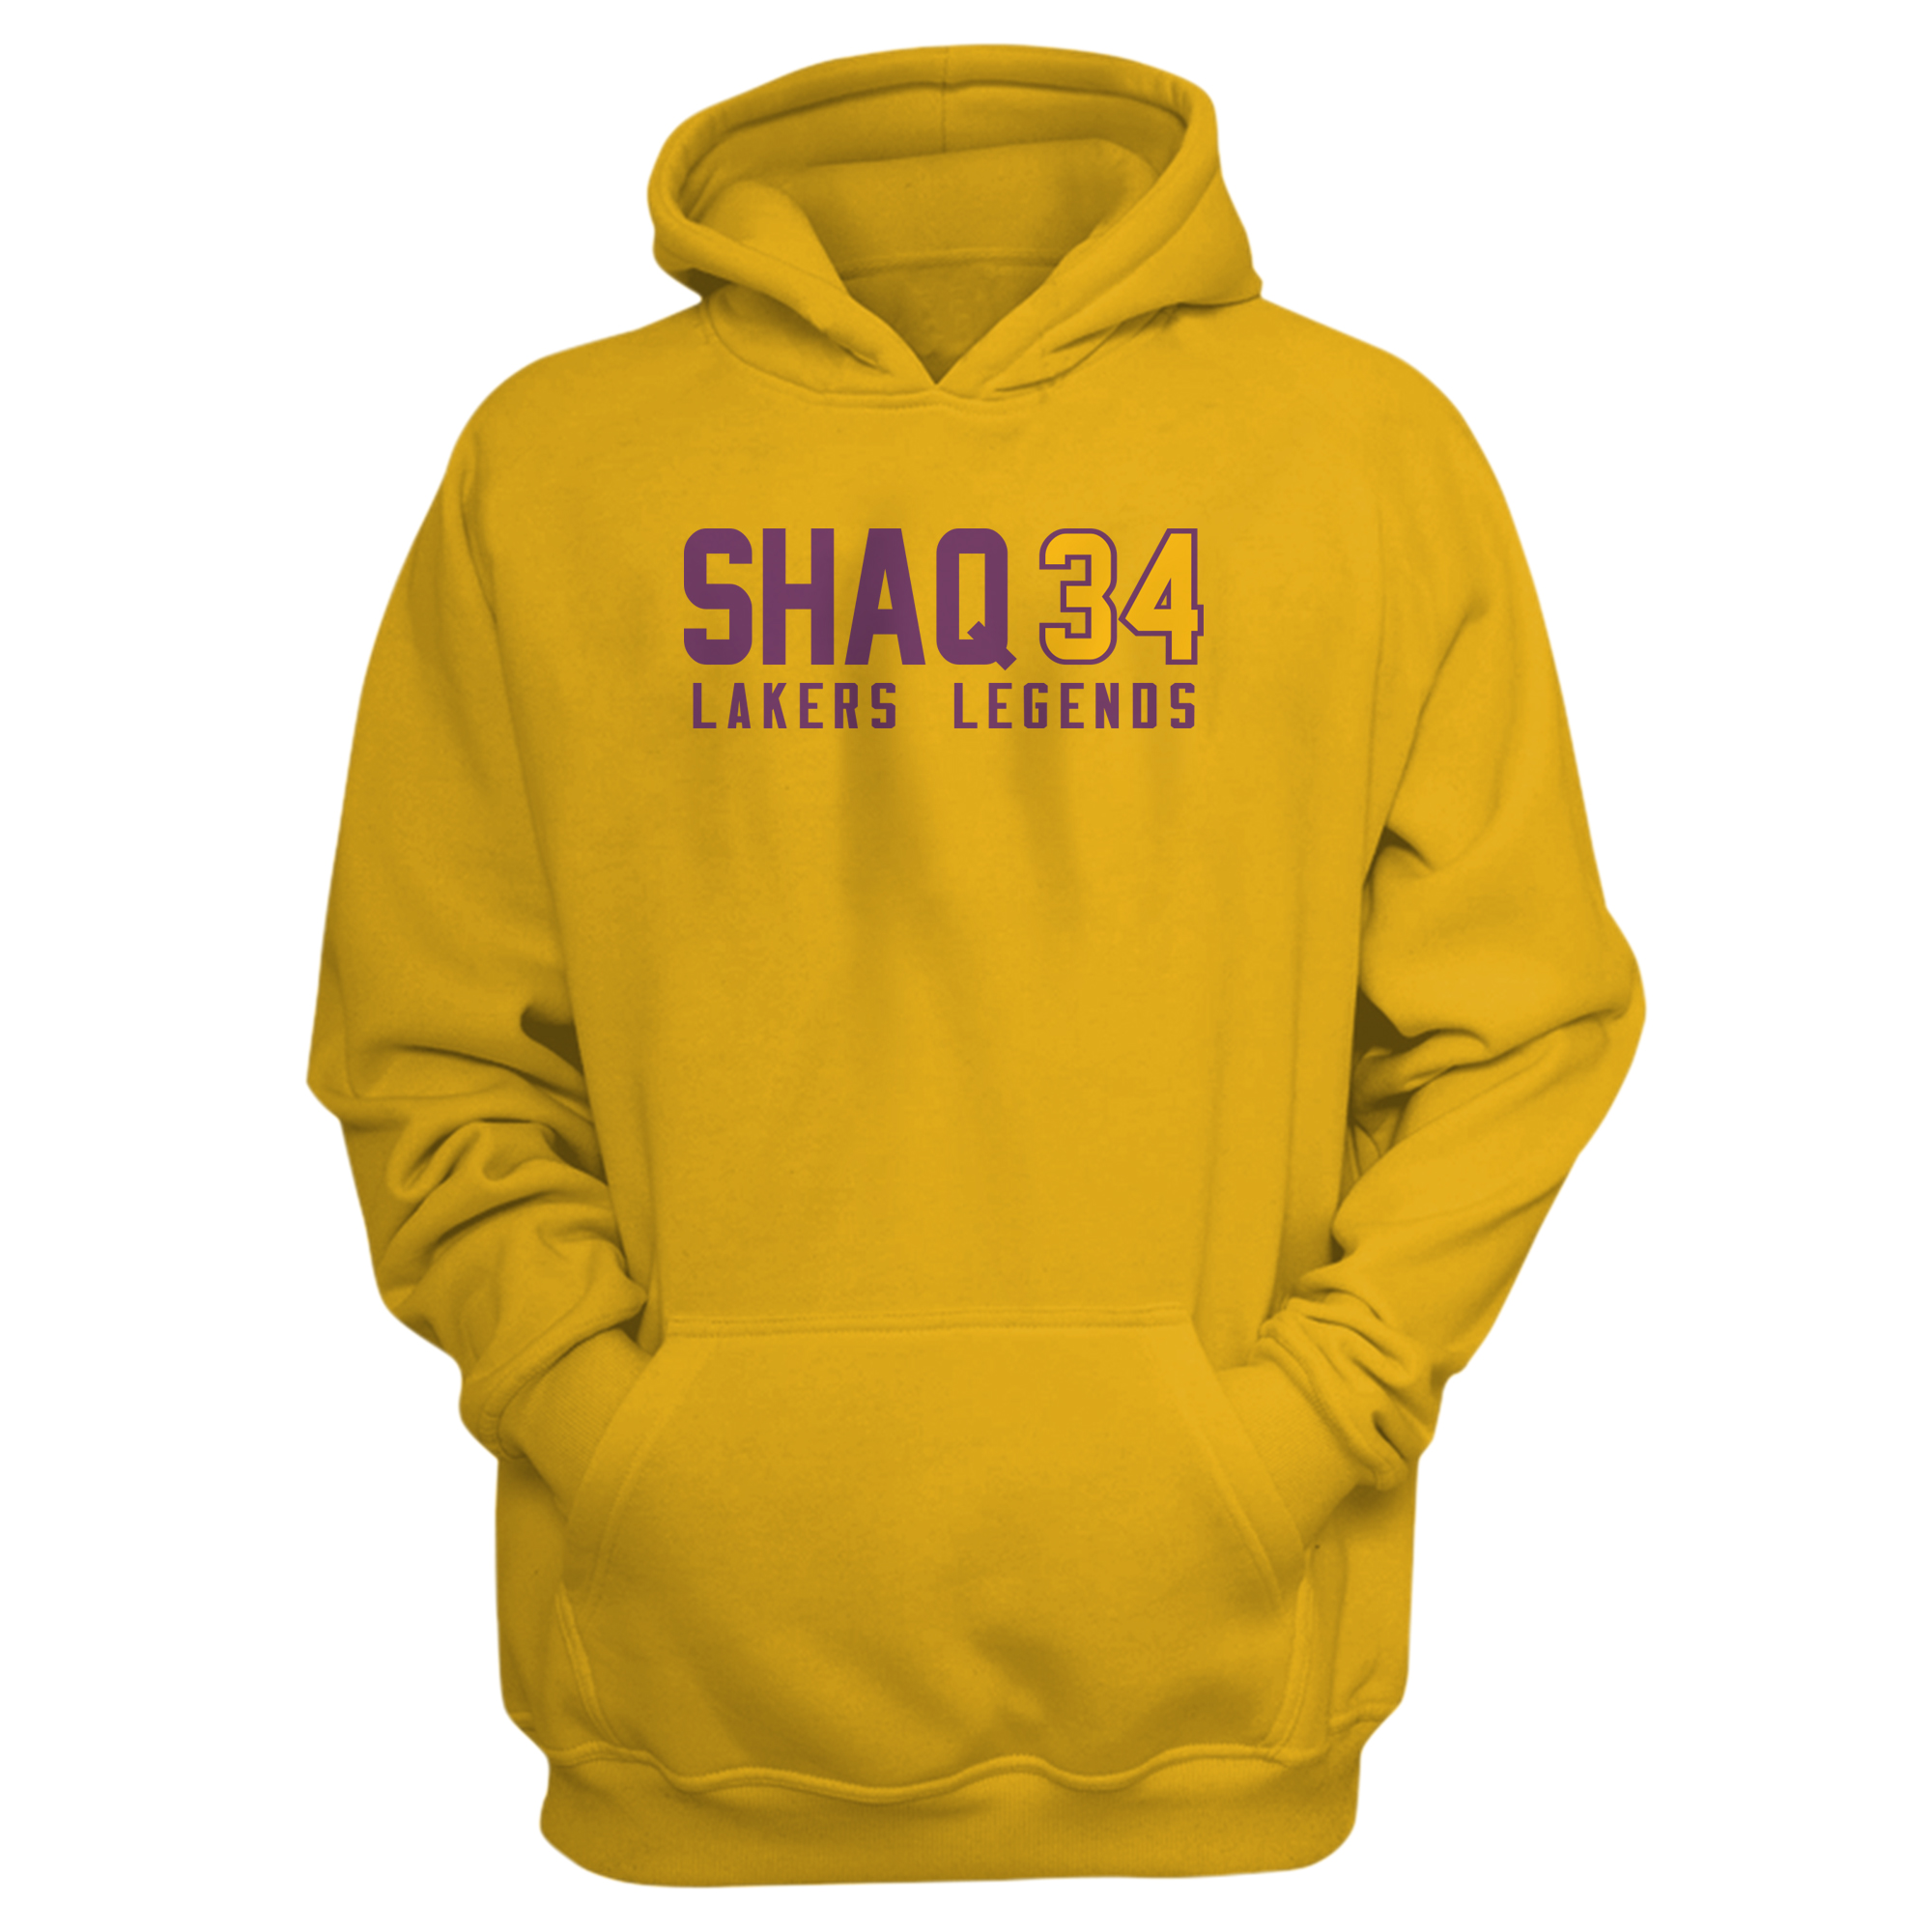 Shaquille O'Neal Hoodie (HD-YLW-848-ShaquilleO'Neal)